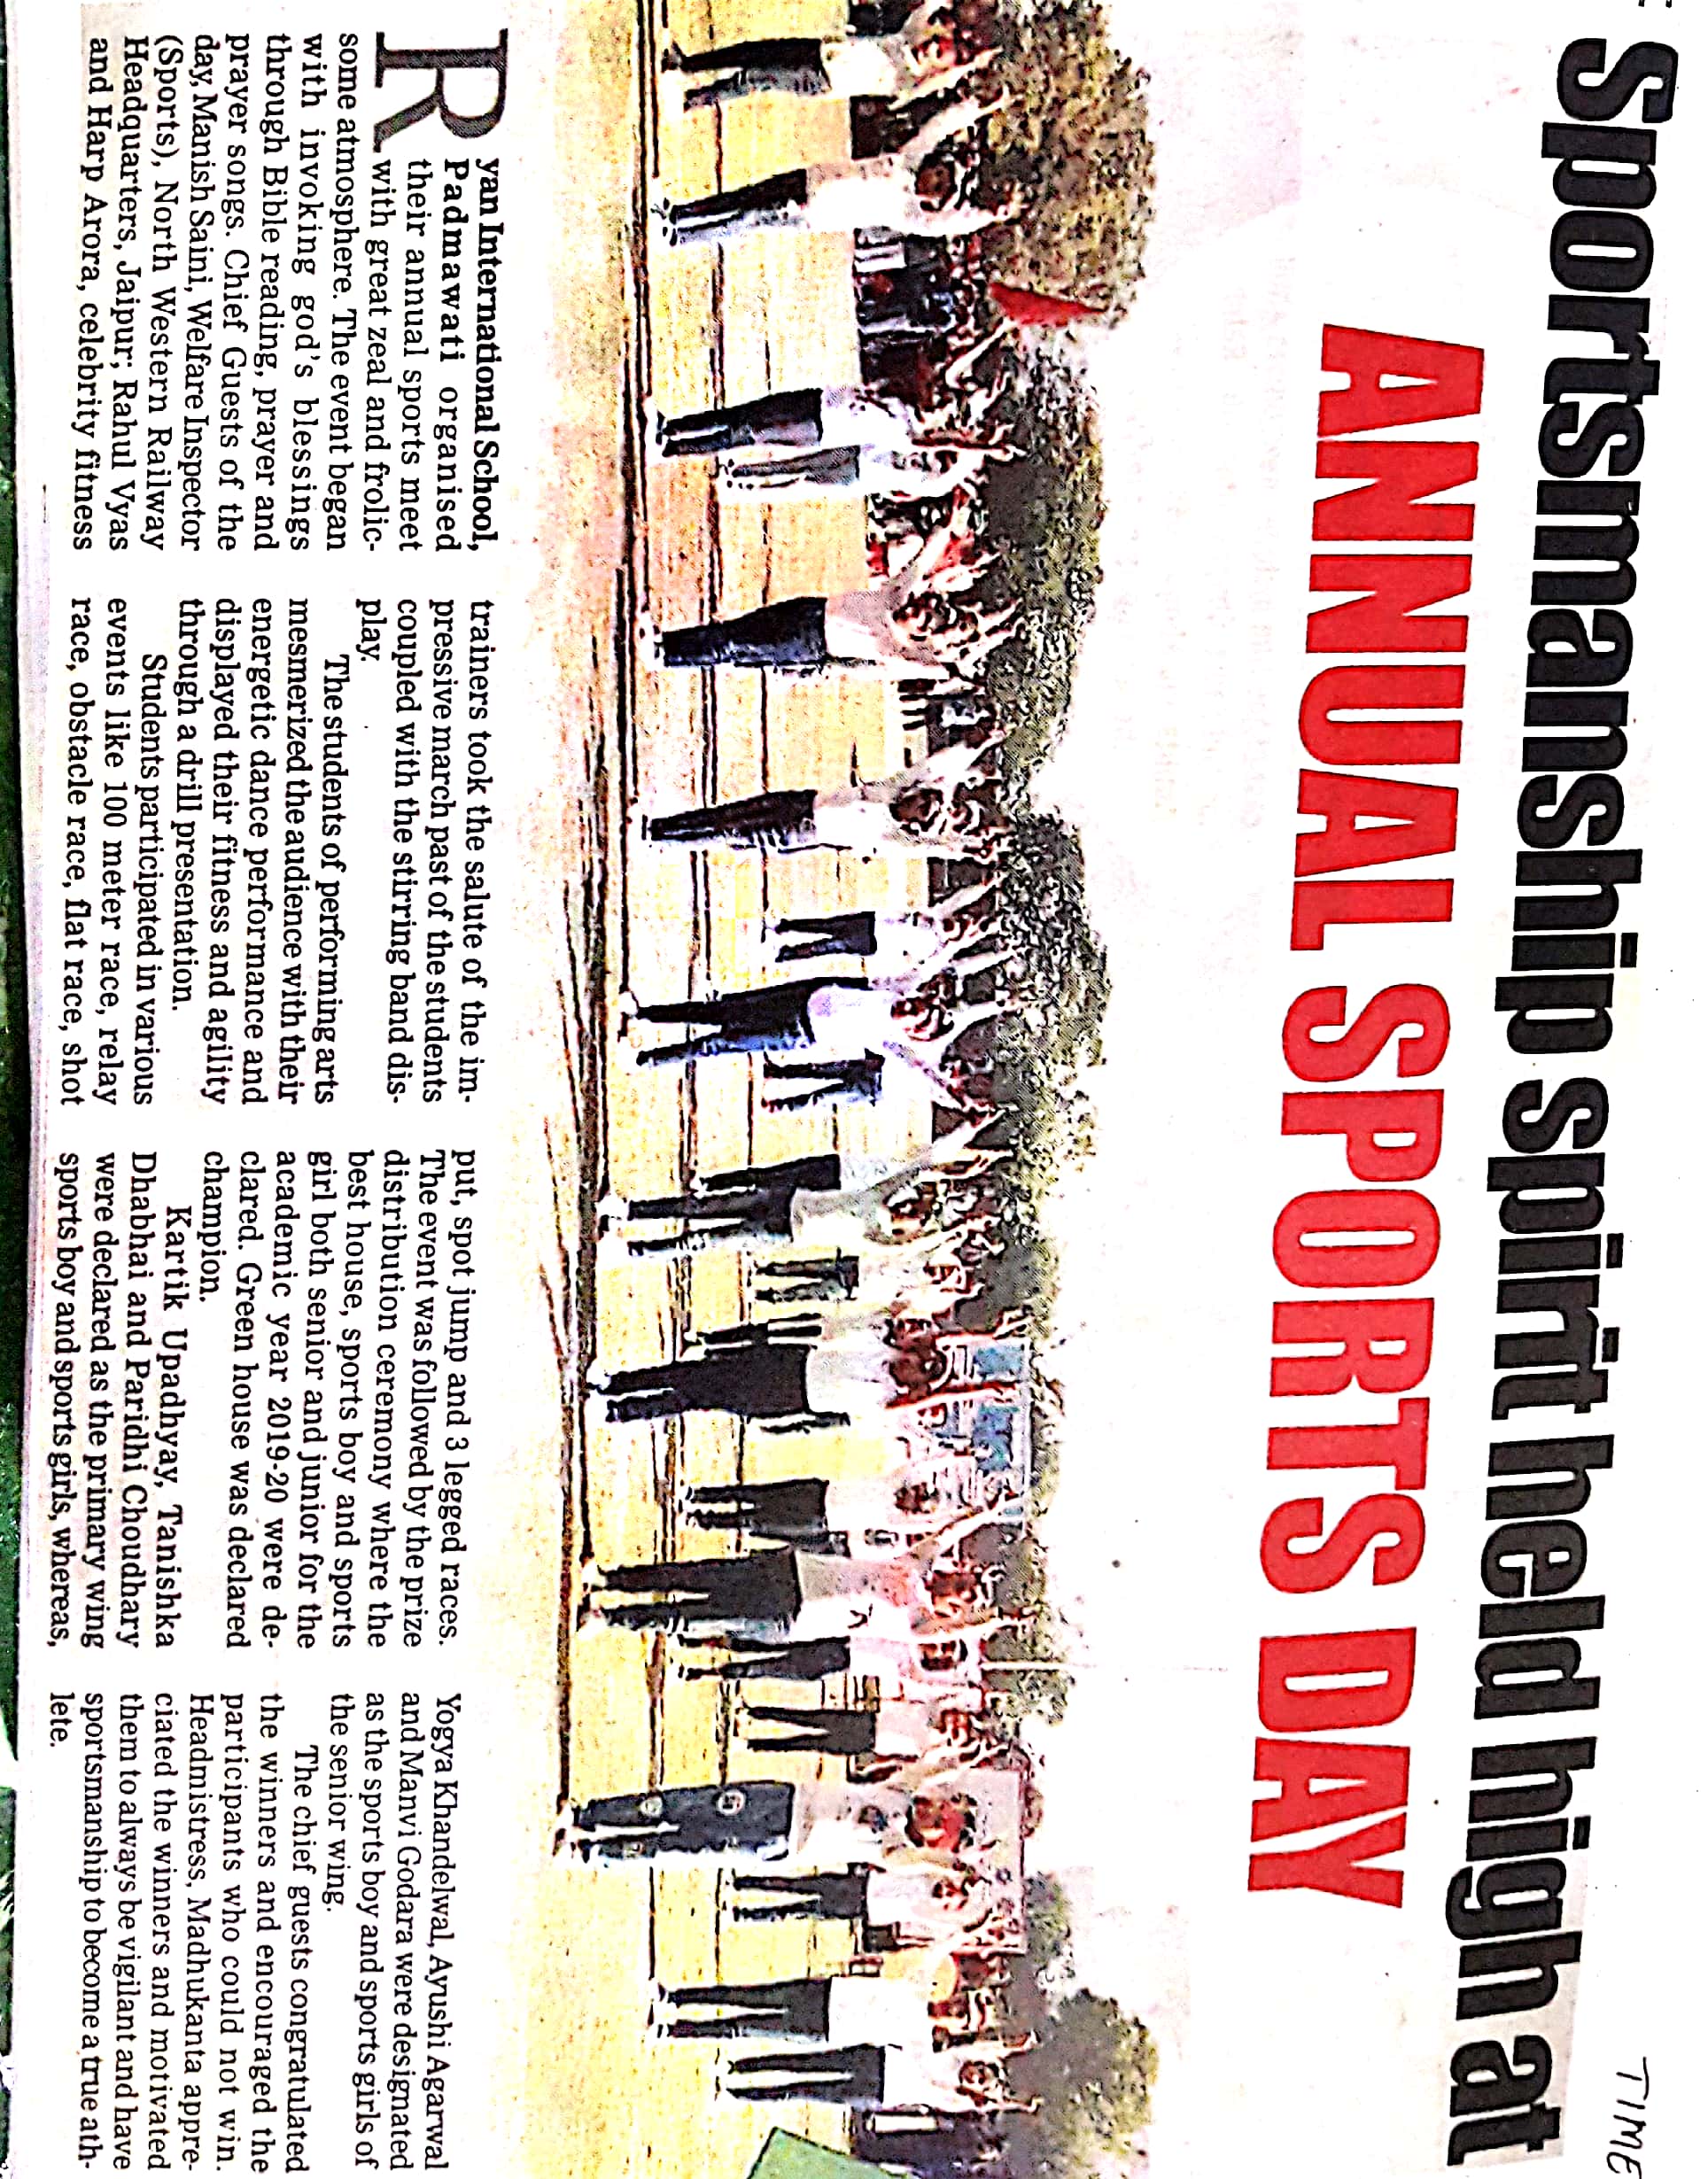 The event of Annual Sports Day was published in Times of India Newspaper - Ryan International School, Nirman Nagar - Ryan Group